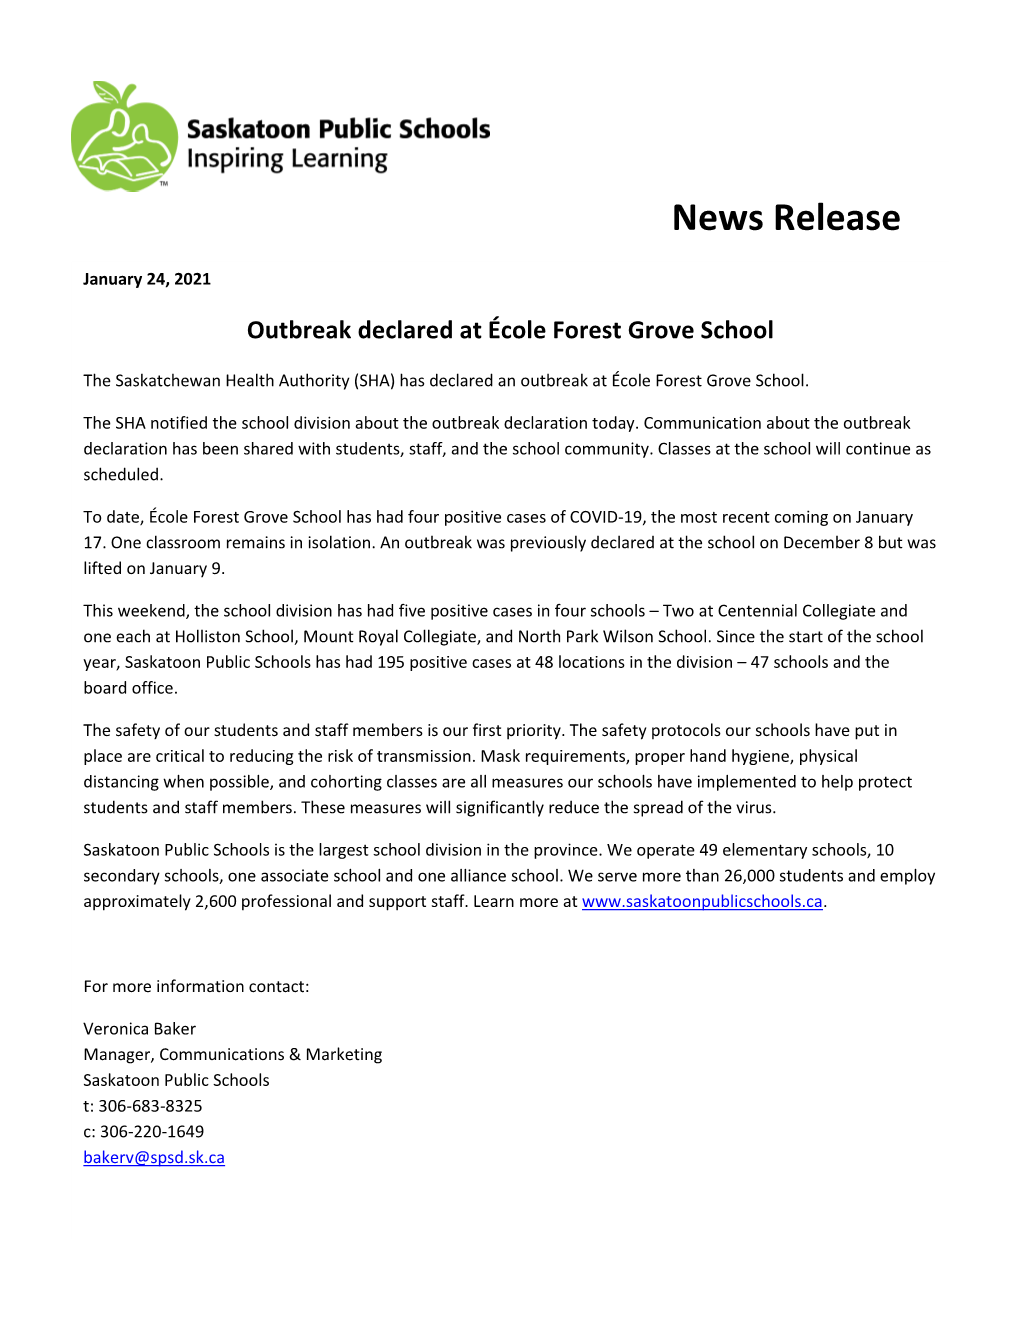 News Release January 24, 2021 Outbreak Declared at École Forest Grove School